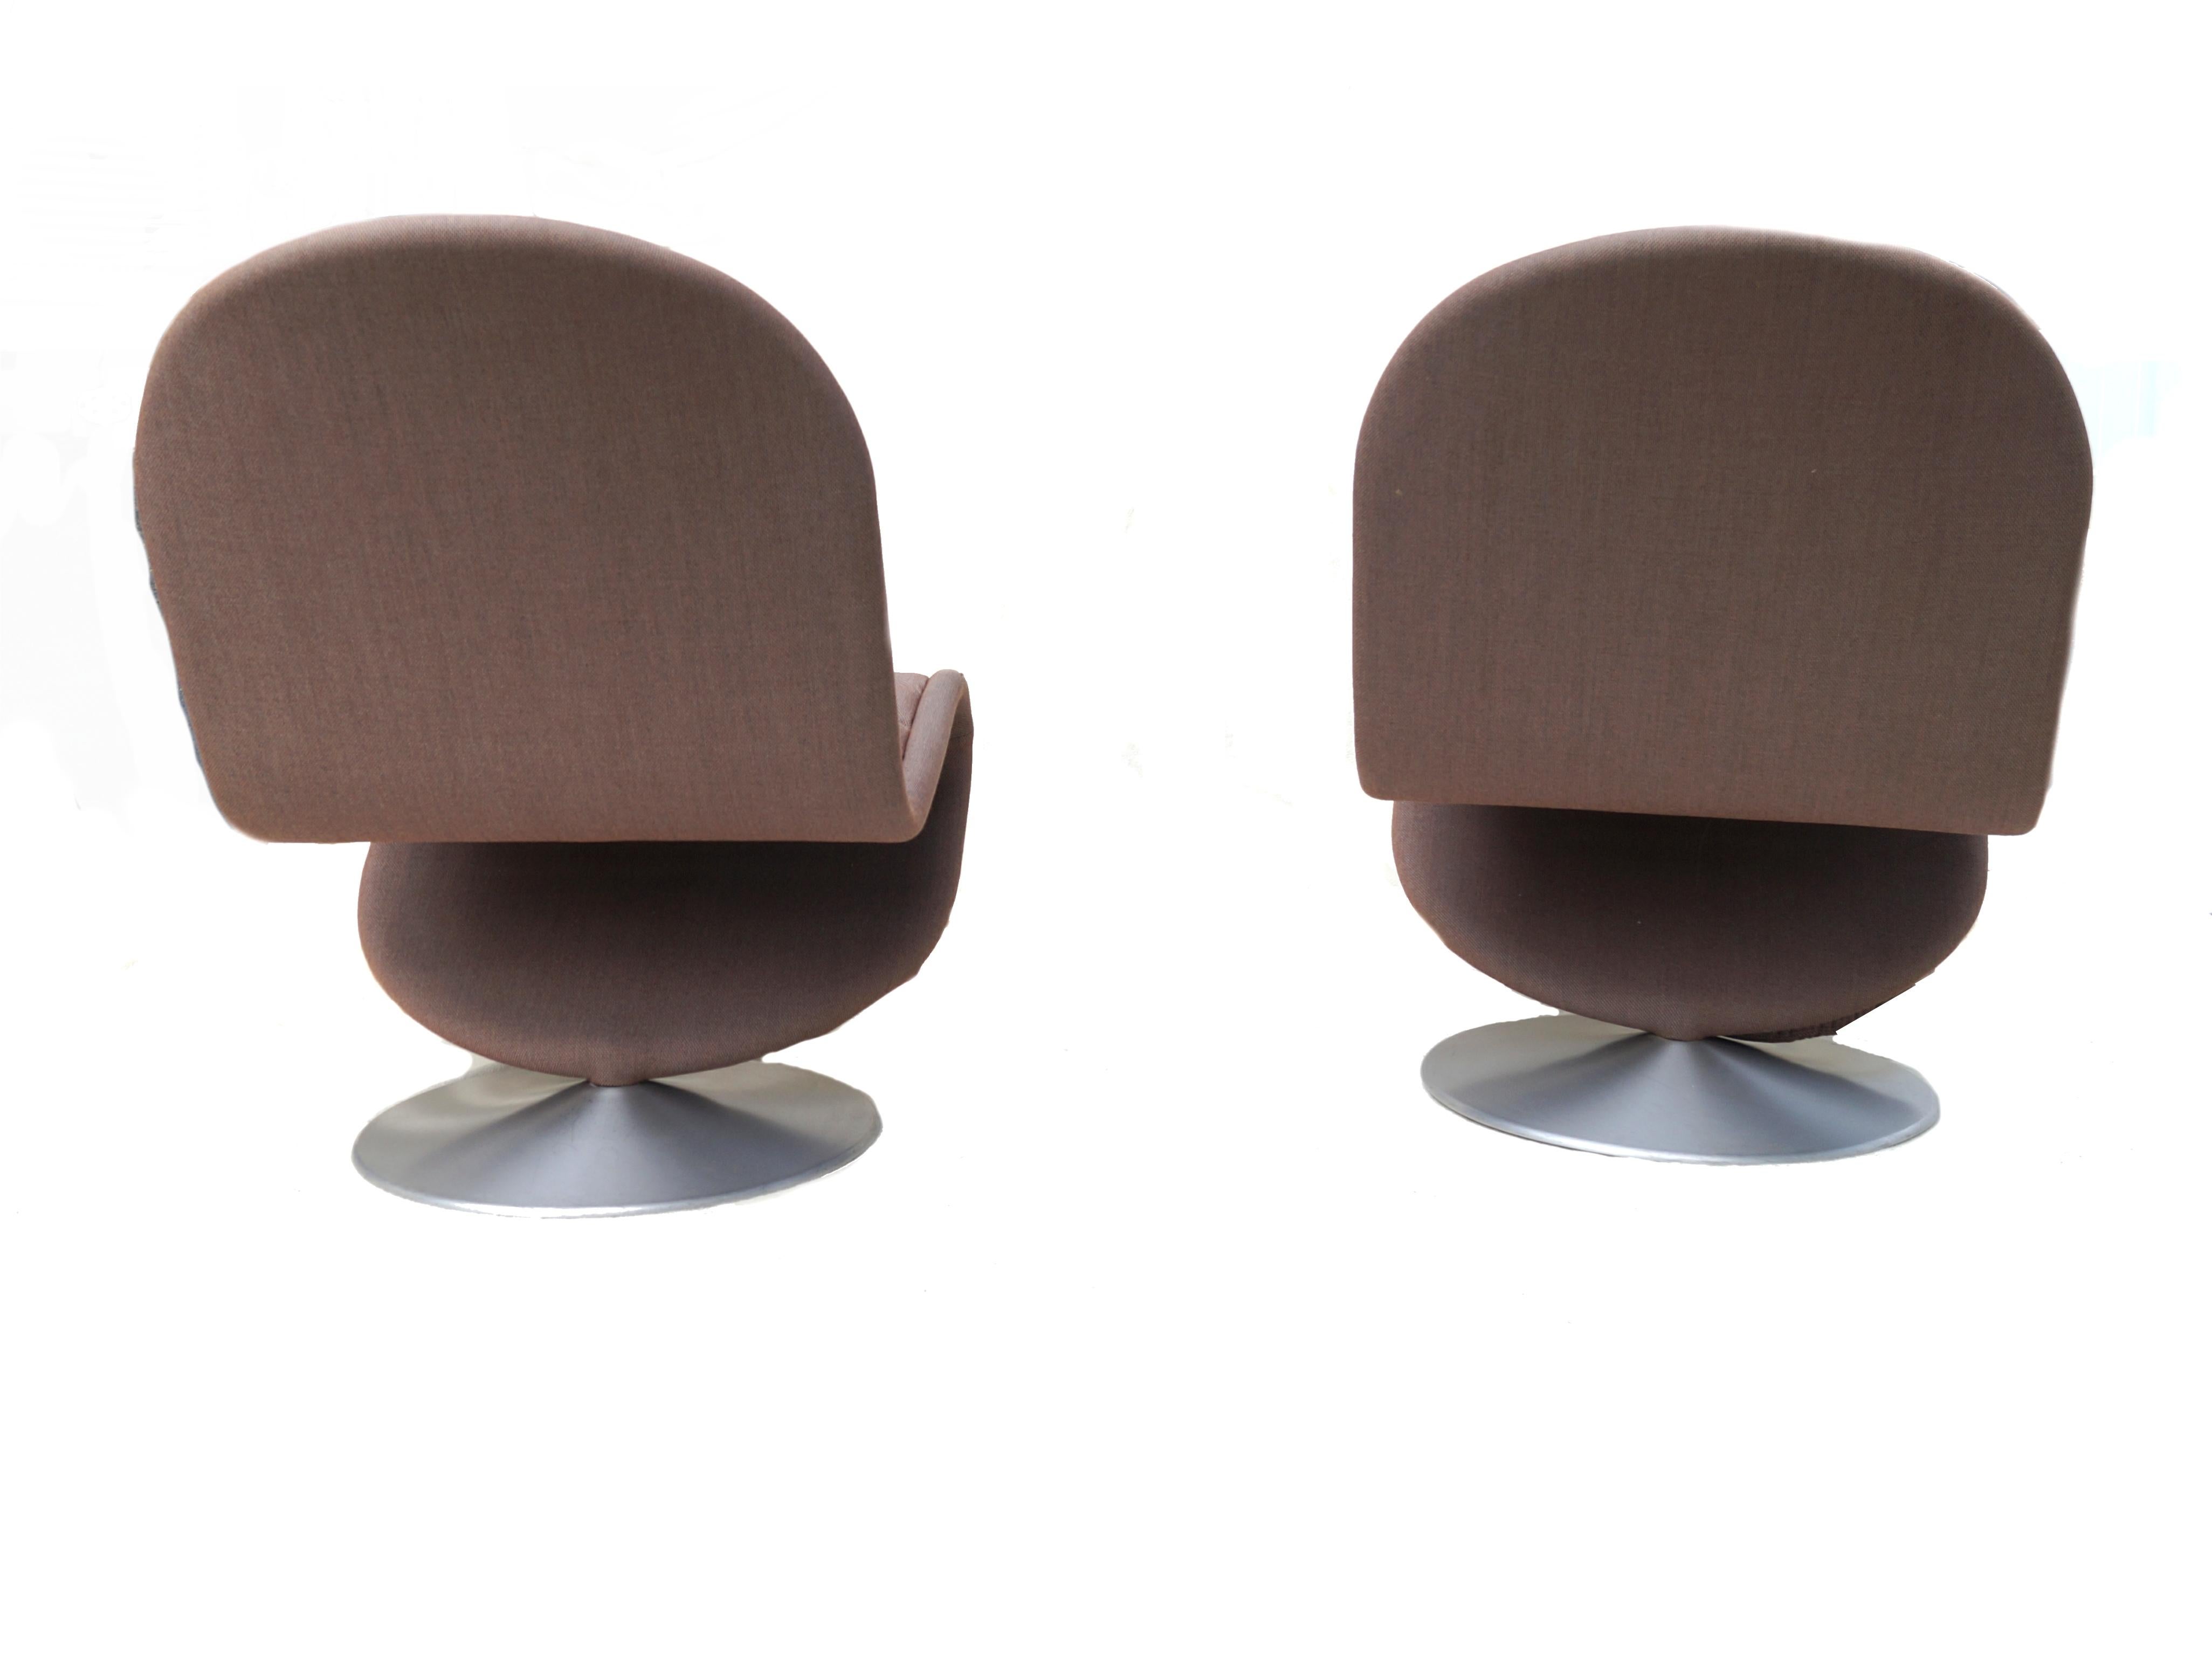 Danish Pair of Verner Panton Tufted 1-2-3 Mid Century Modern Lounge Chairs For Sale